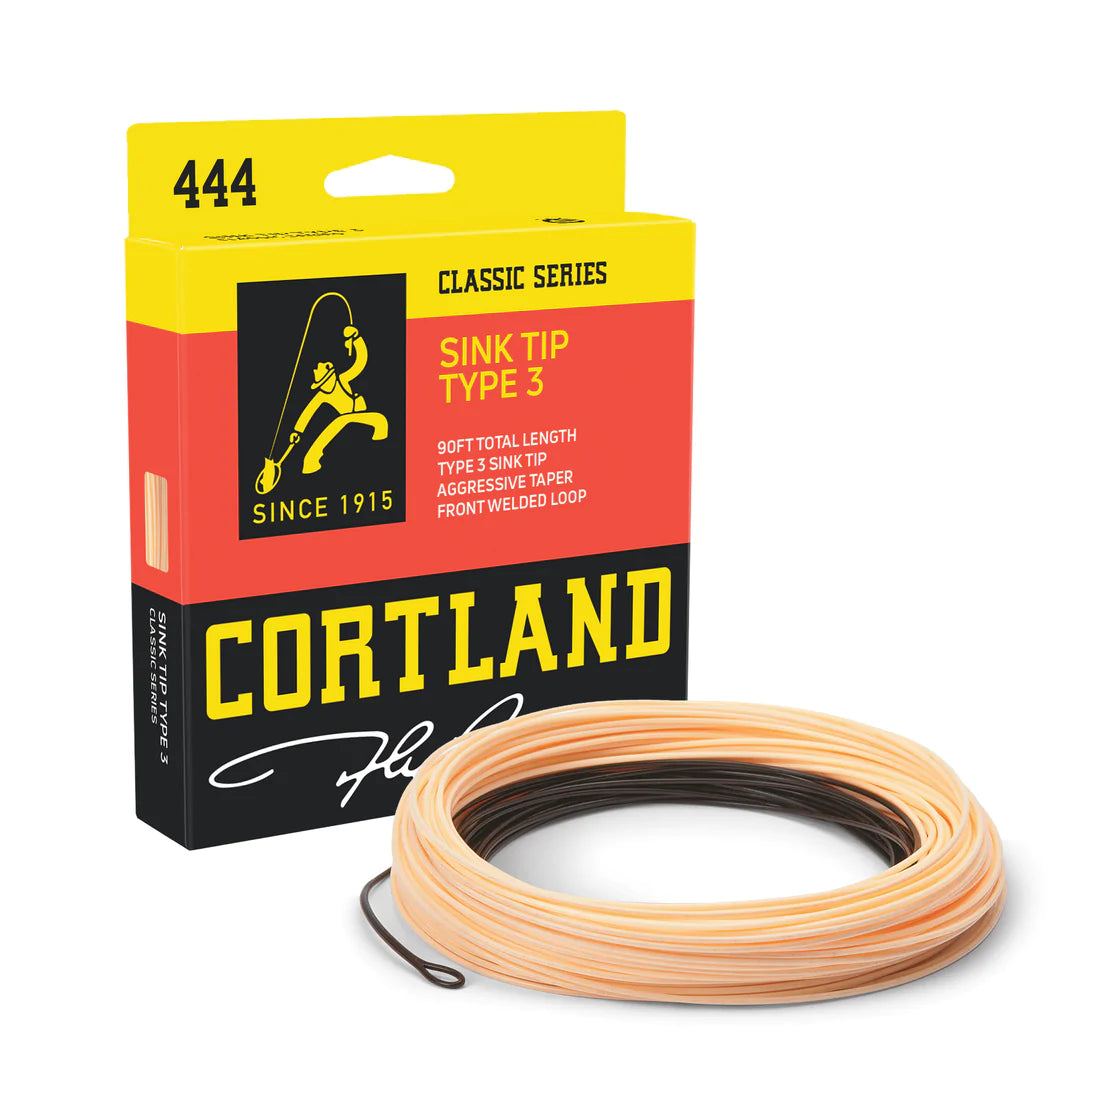 Cortland 444 Classic Sink Tip Type 3 Fly Line